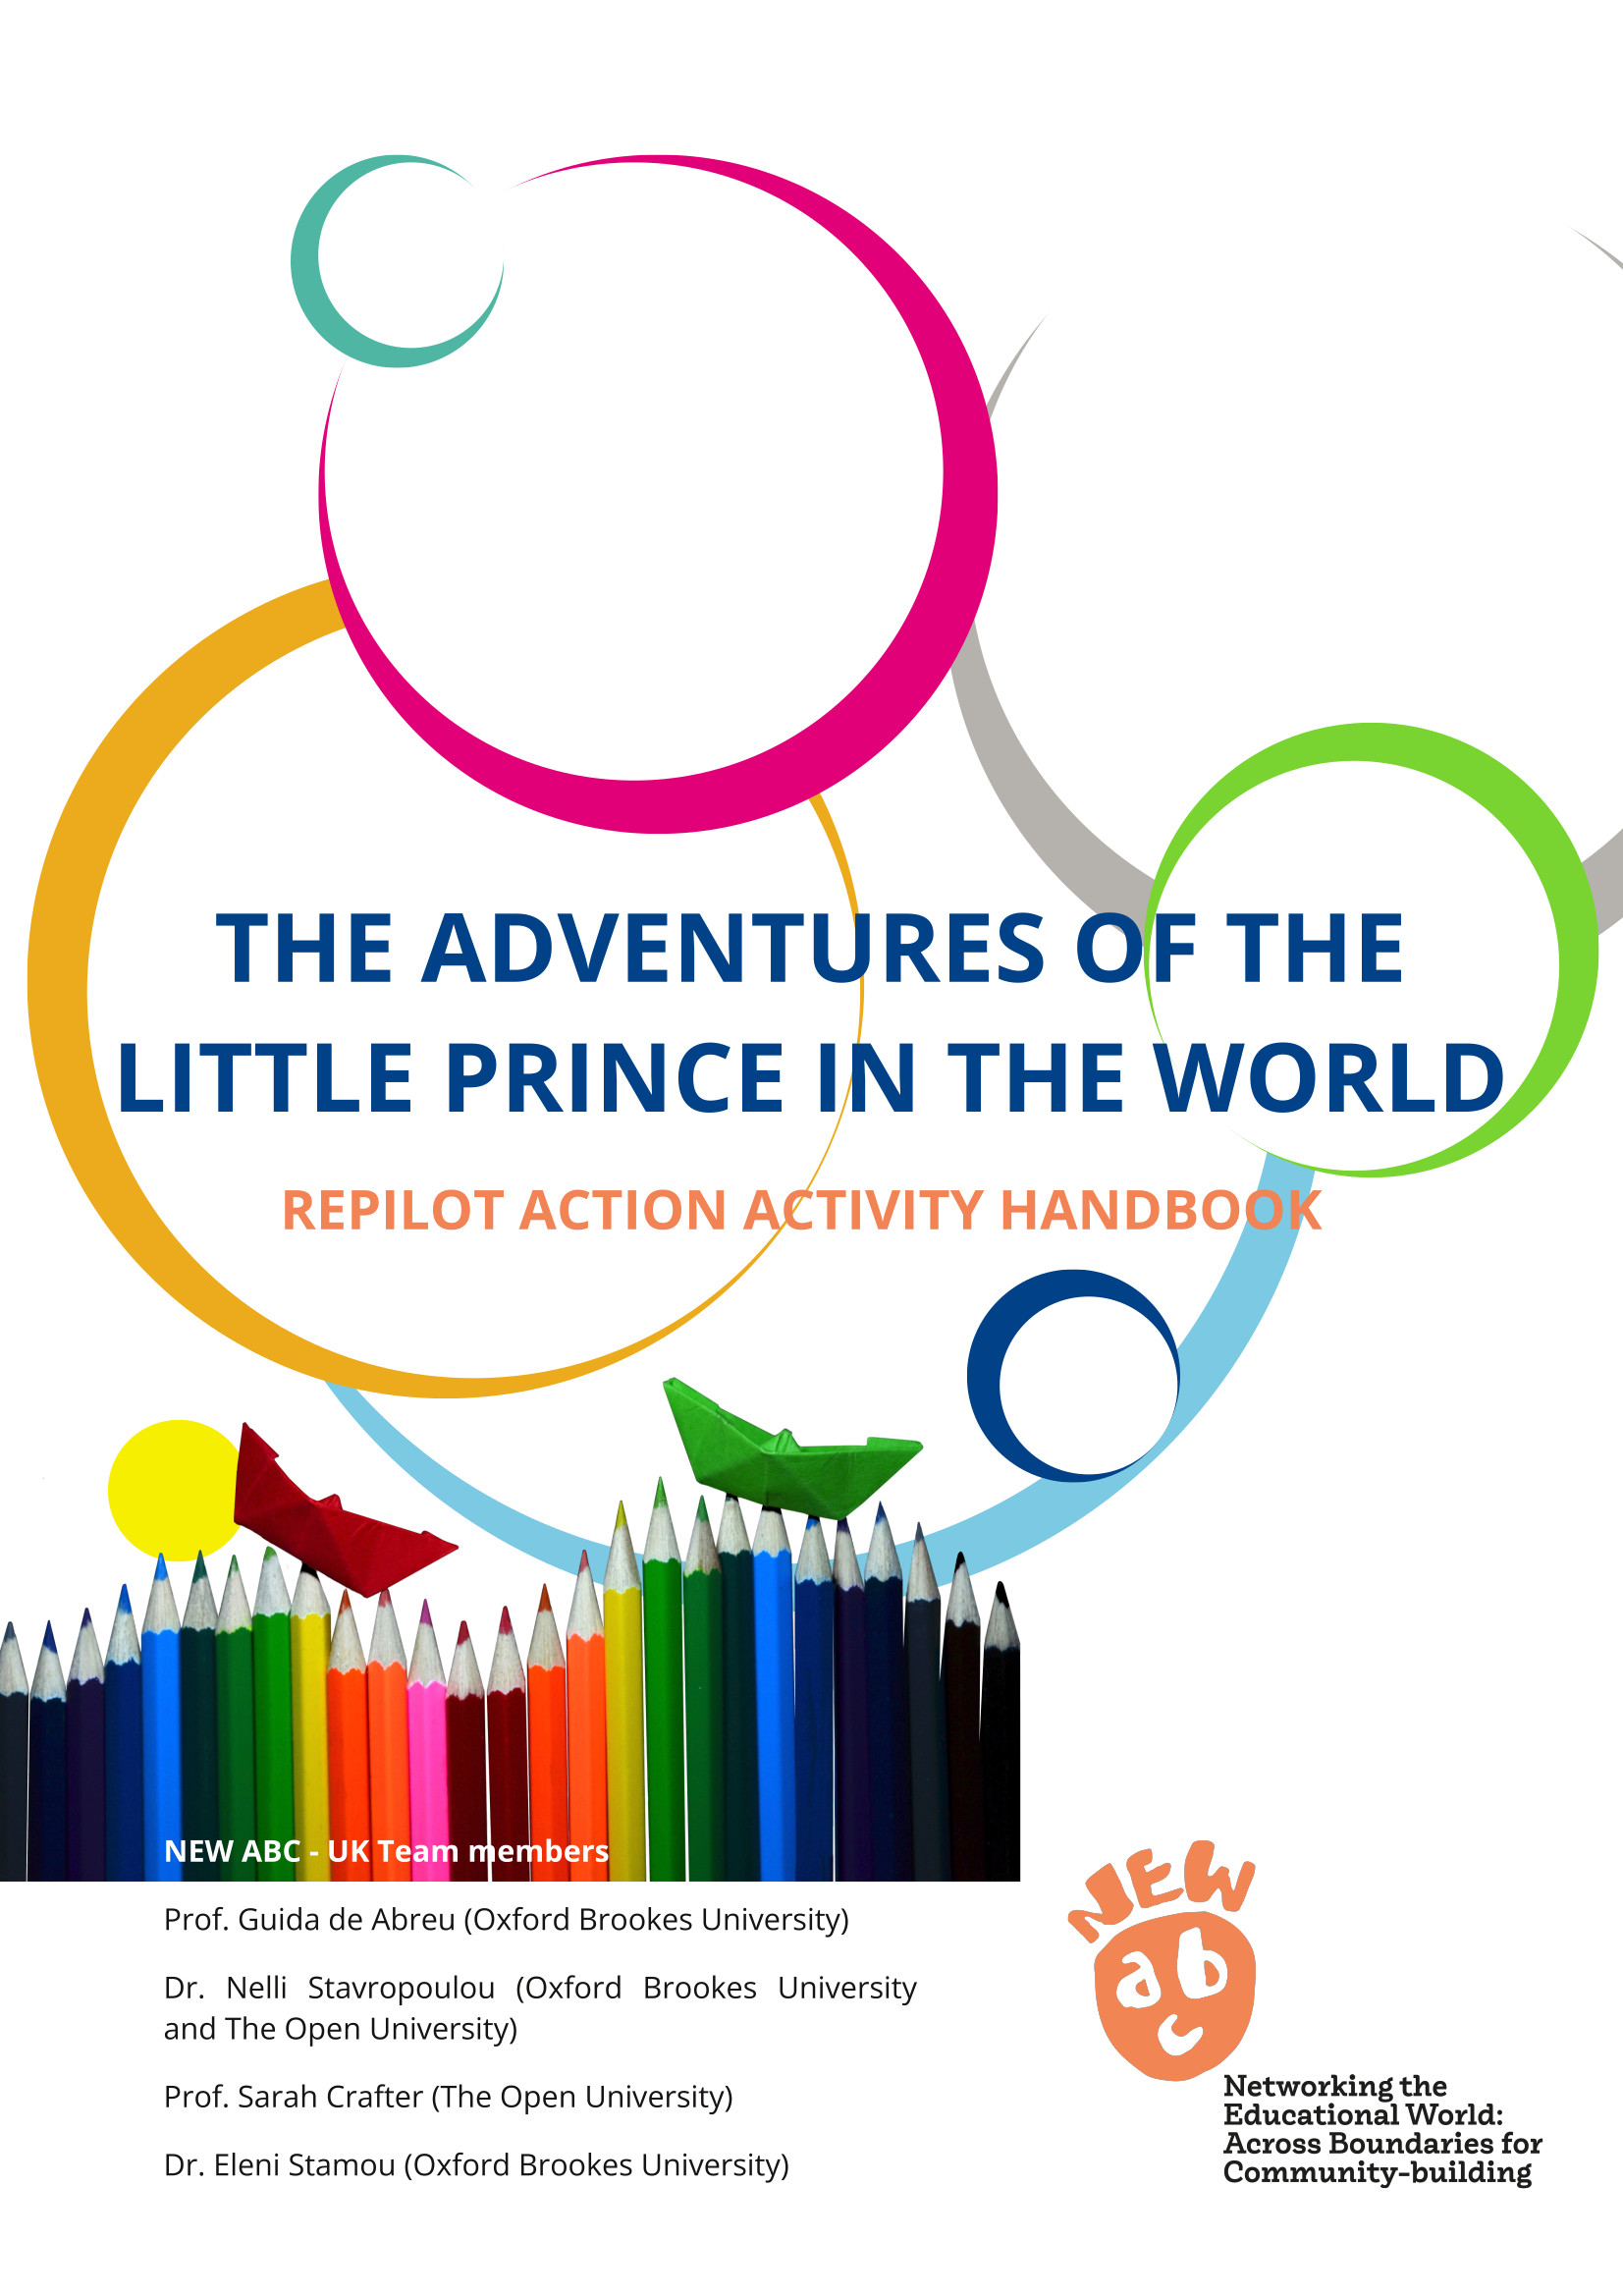 The adventures of the Little Prince in the World